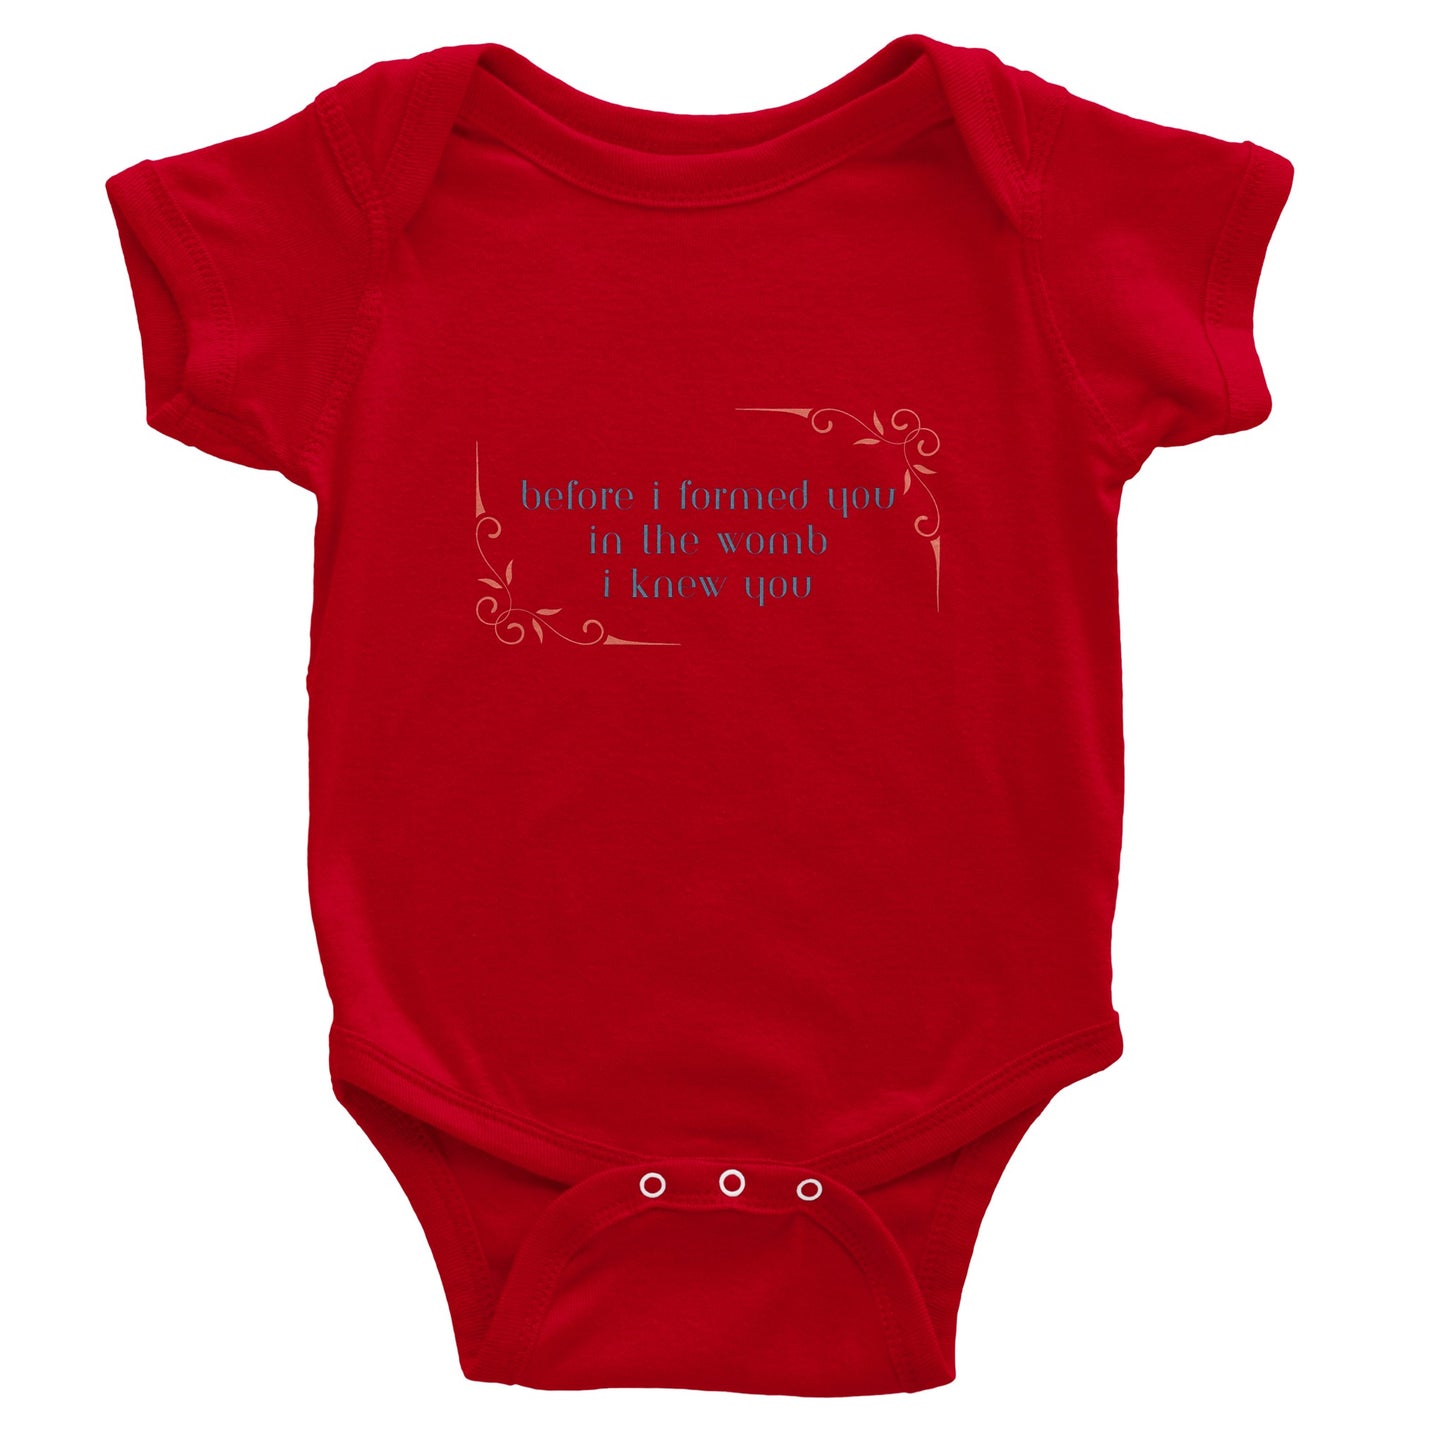 Before I Formed You in the Womb - Classic Baby Short Sleeve Bodysuit